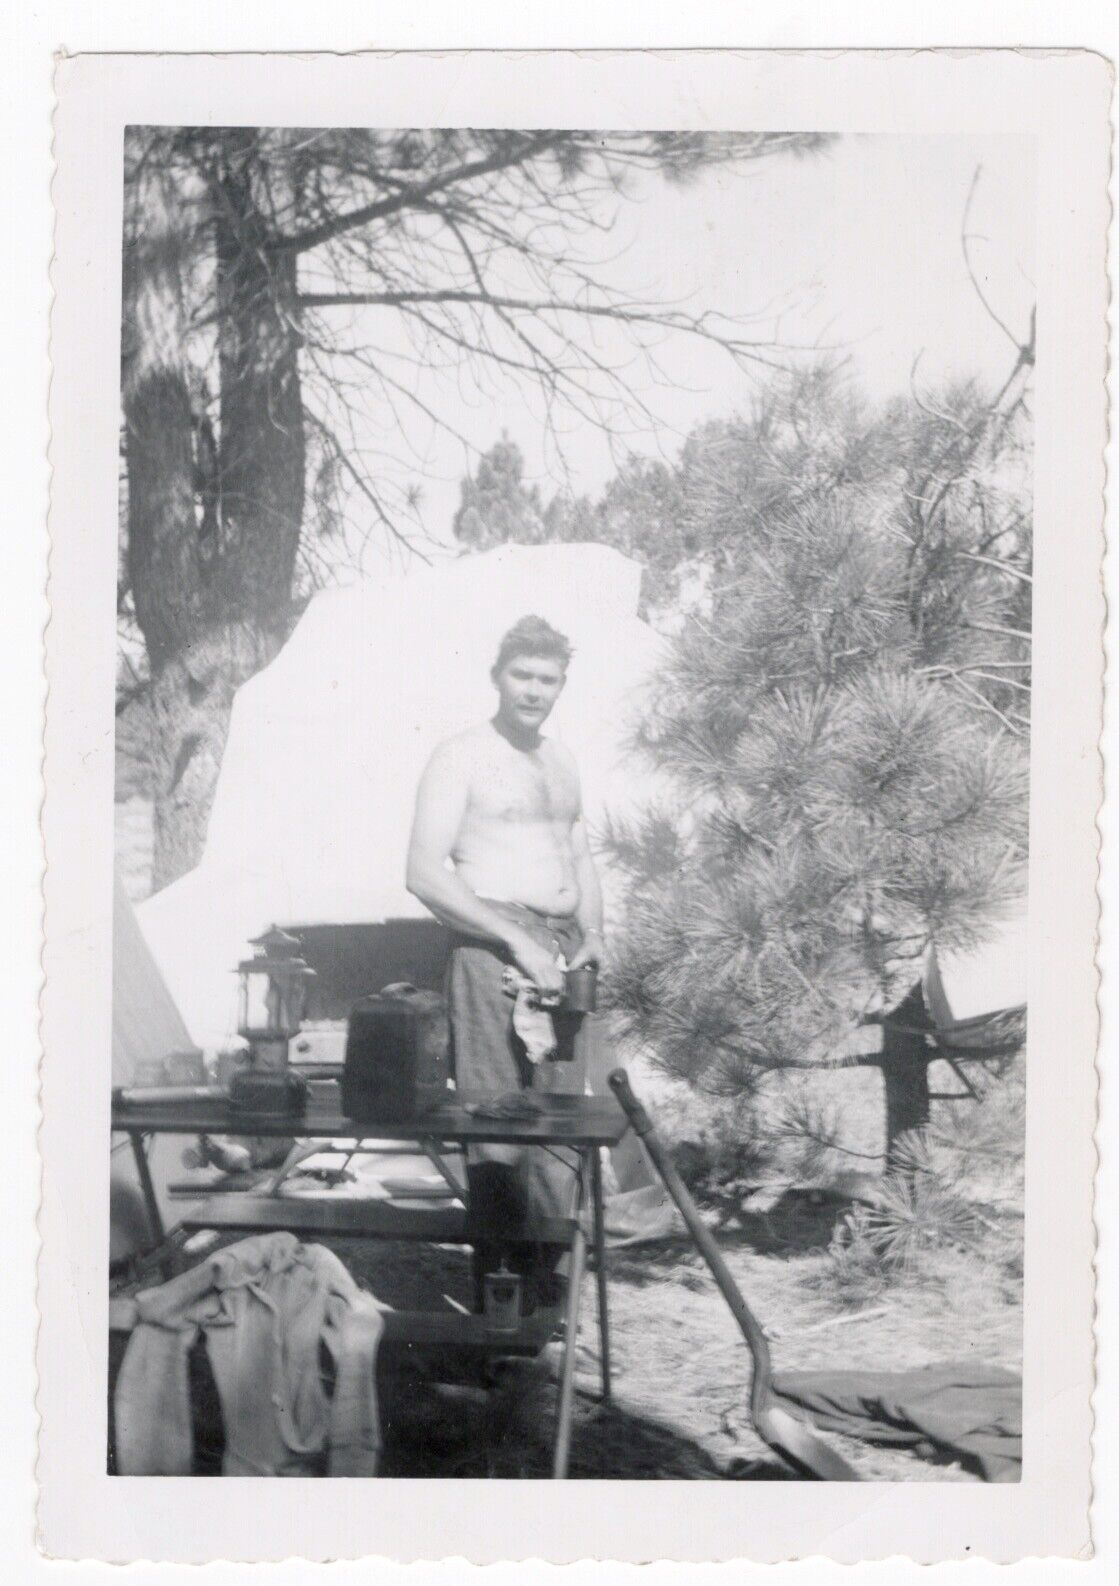 Vintage Photo Beefy Handsome Shirtless Man Camping in the Woods c1930-40s